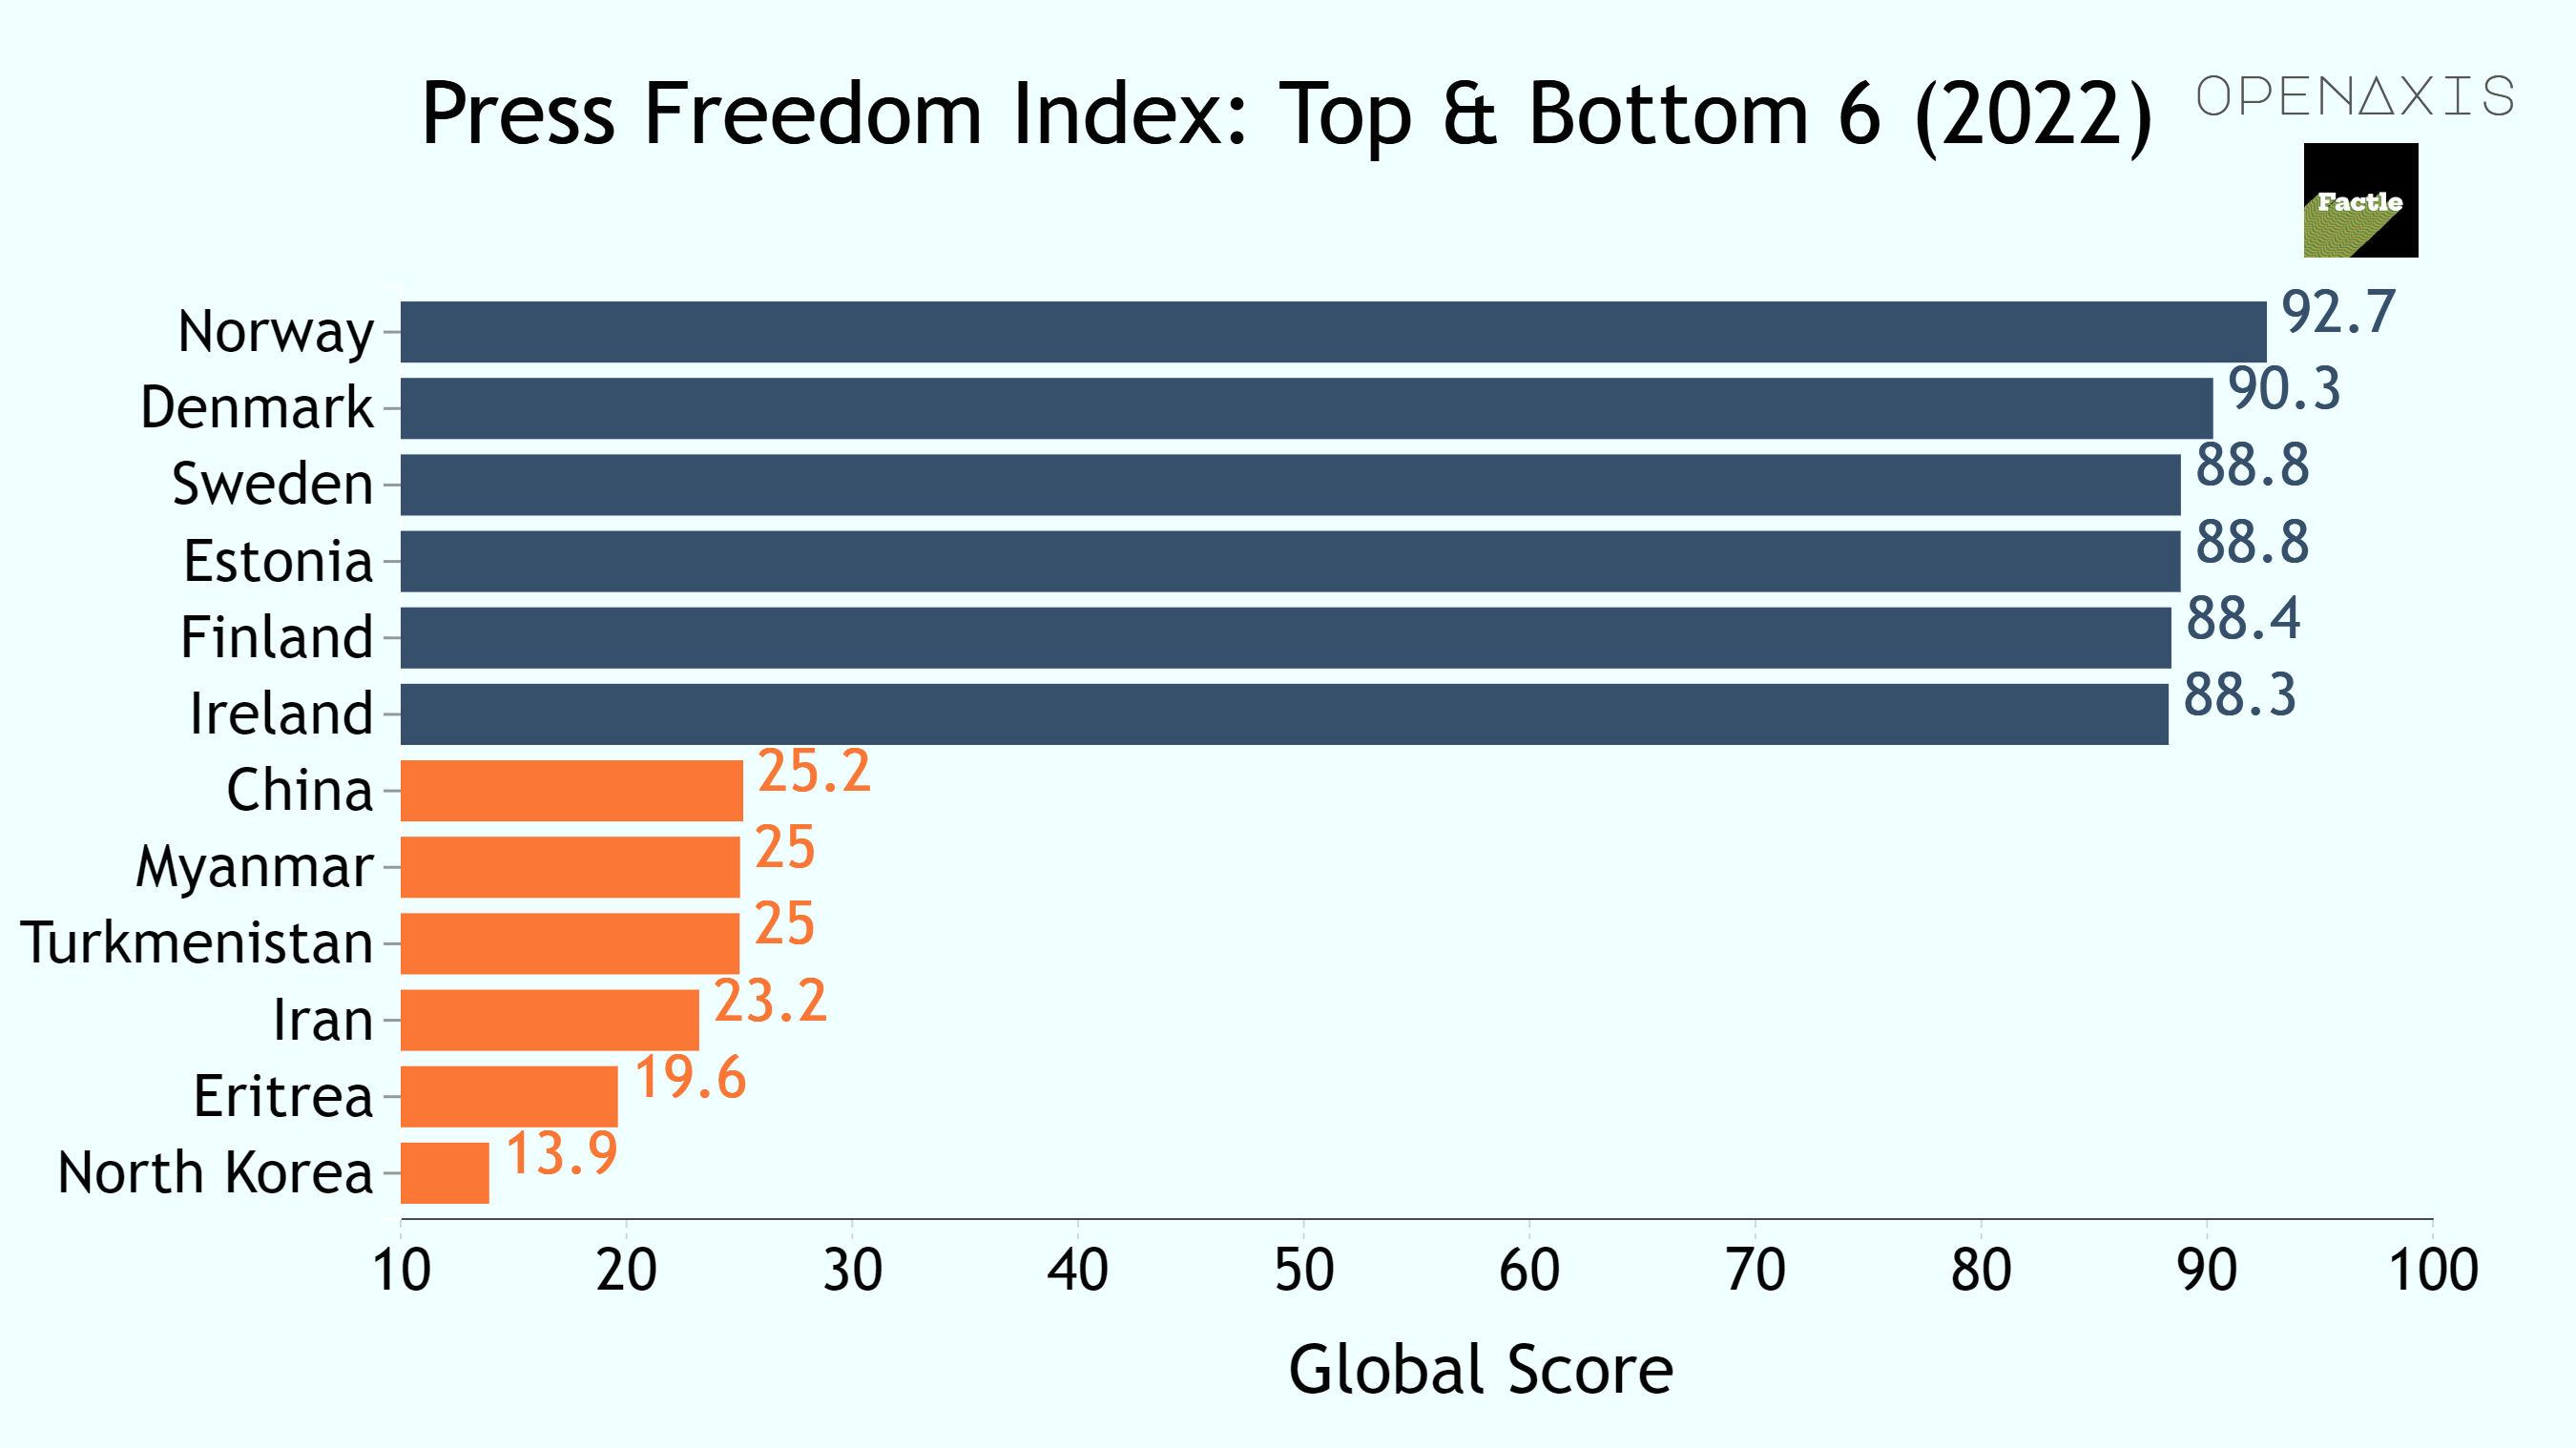 <p>The purpose of the World Press Freedom Index, developed by Reporters Without Borders (RSF), is to compare the level of press freedom enjoyed by journalists and media in 180 countries and territories. </p><p><br /></p><p>Each country or territory’s score is evaluated using five contextual indicators that reflect the press freedom situation in all of its complexity: <strong>political context, legal framework, economic context, sociocultural context and safety</strong>.</p><p><br /></p><p>Estonia jumped 11 places to enter the top five this year, while Myanmar dropped 36 positions to fall into the bottom five. The United States ranks 42nd.</p><p><br /></p><p>﻿<a href="/search?q=%23press" target="_blank">#press</a>﻿ </p><p><br /></p><p>Source: <a href="/data/3703" target="_blank">Press Freedom Index by Reporters Without Borders</a></p><p><br /></p>